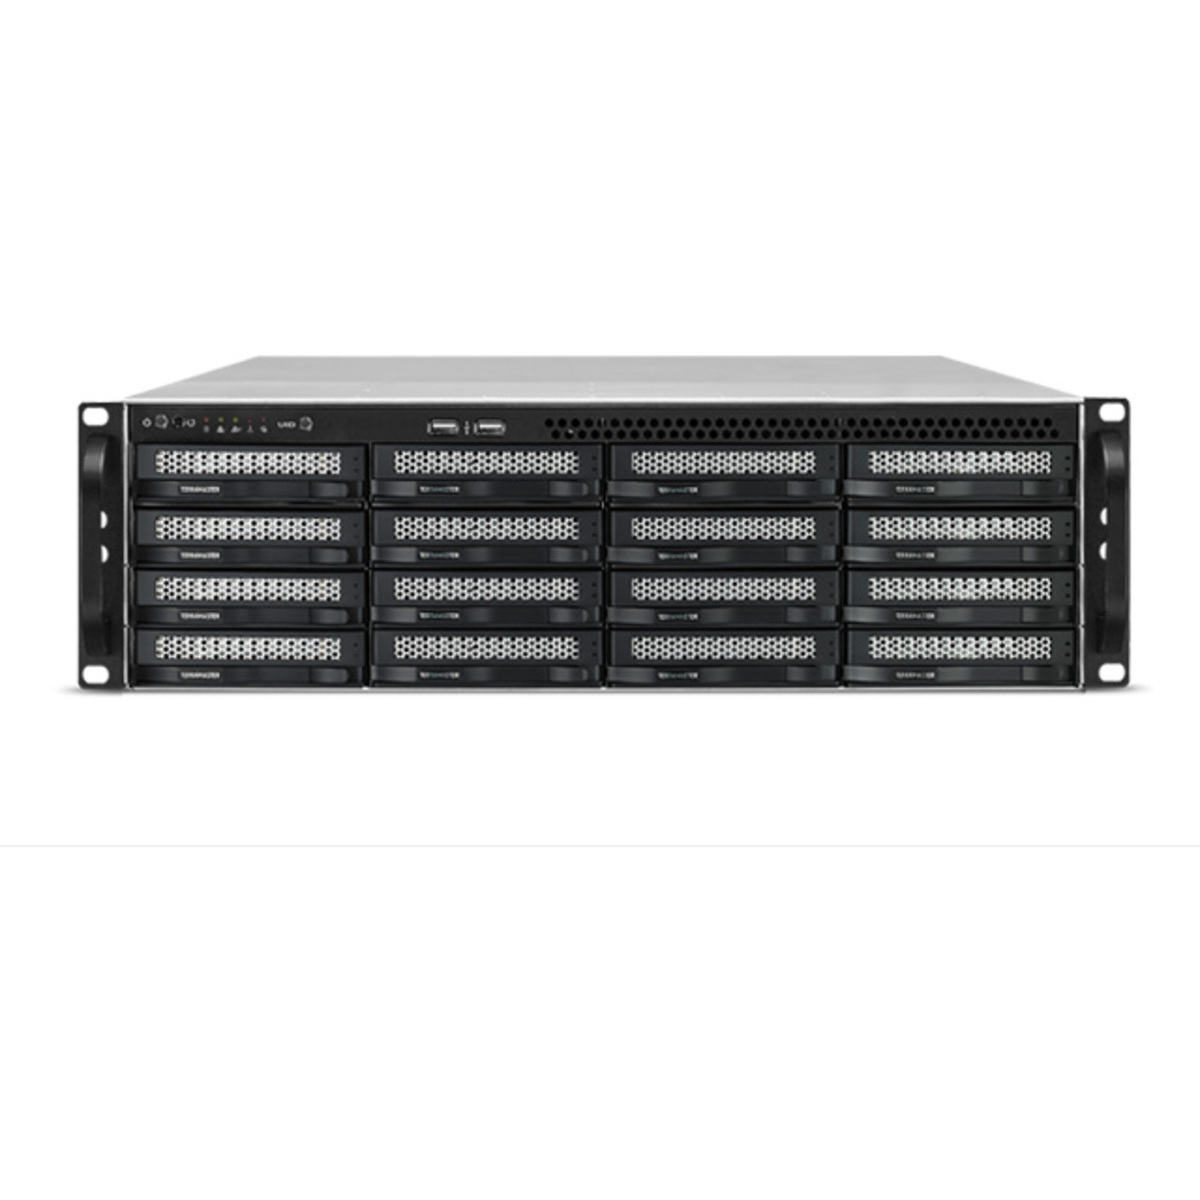 TerraMaster U16-722-2224 60tb 16-Bay RackMount Large Business / Enterprise NAS - Network Attached Storage Device 10x6tb Western Digital Red Pro WD6003FFBX 3.5 7200rpm SATA 6Gb/s HDD NAS Class Drives Installed - Burn-In Tested U16-722-2224